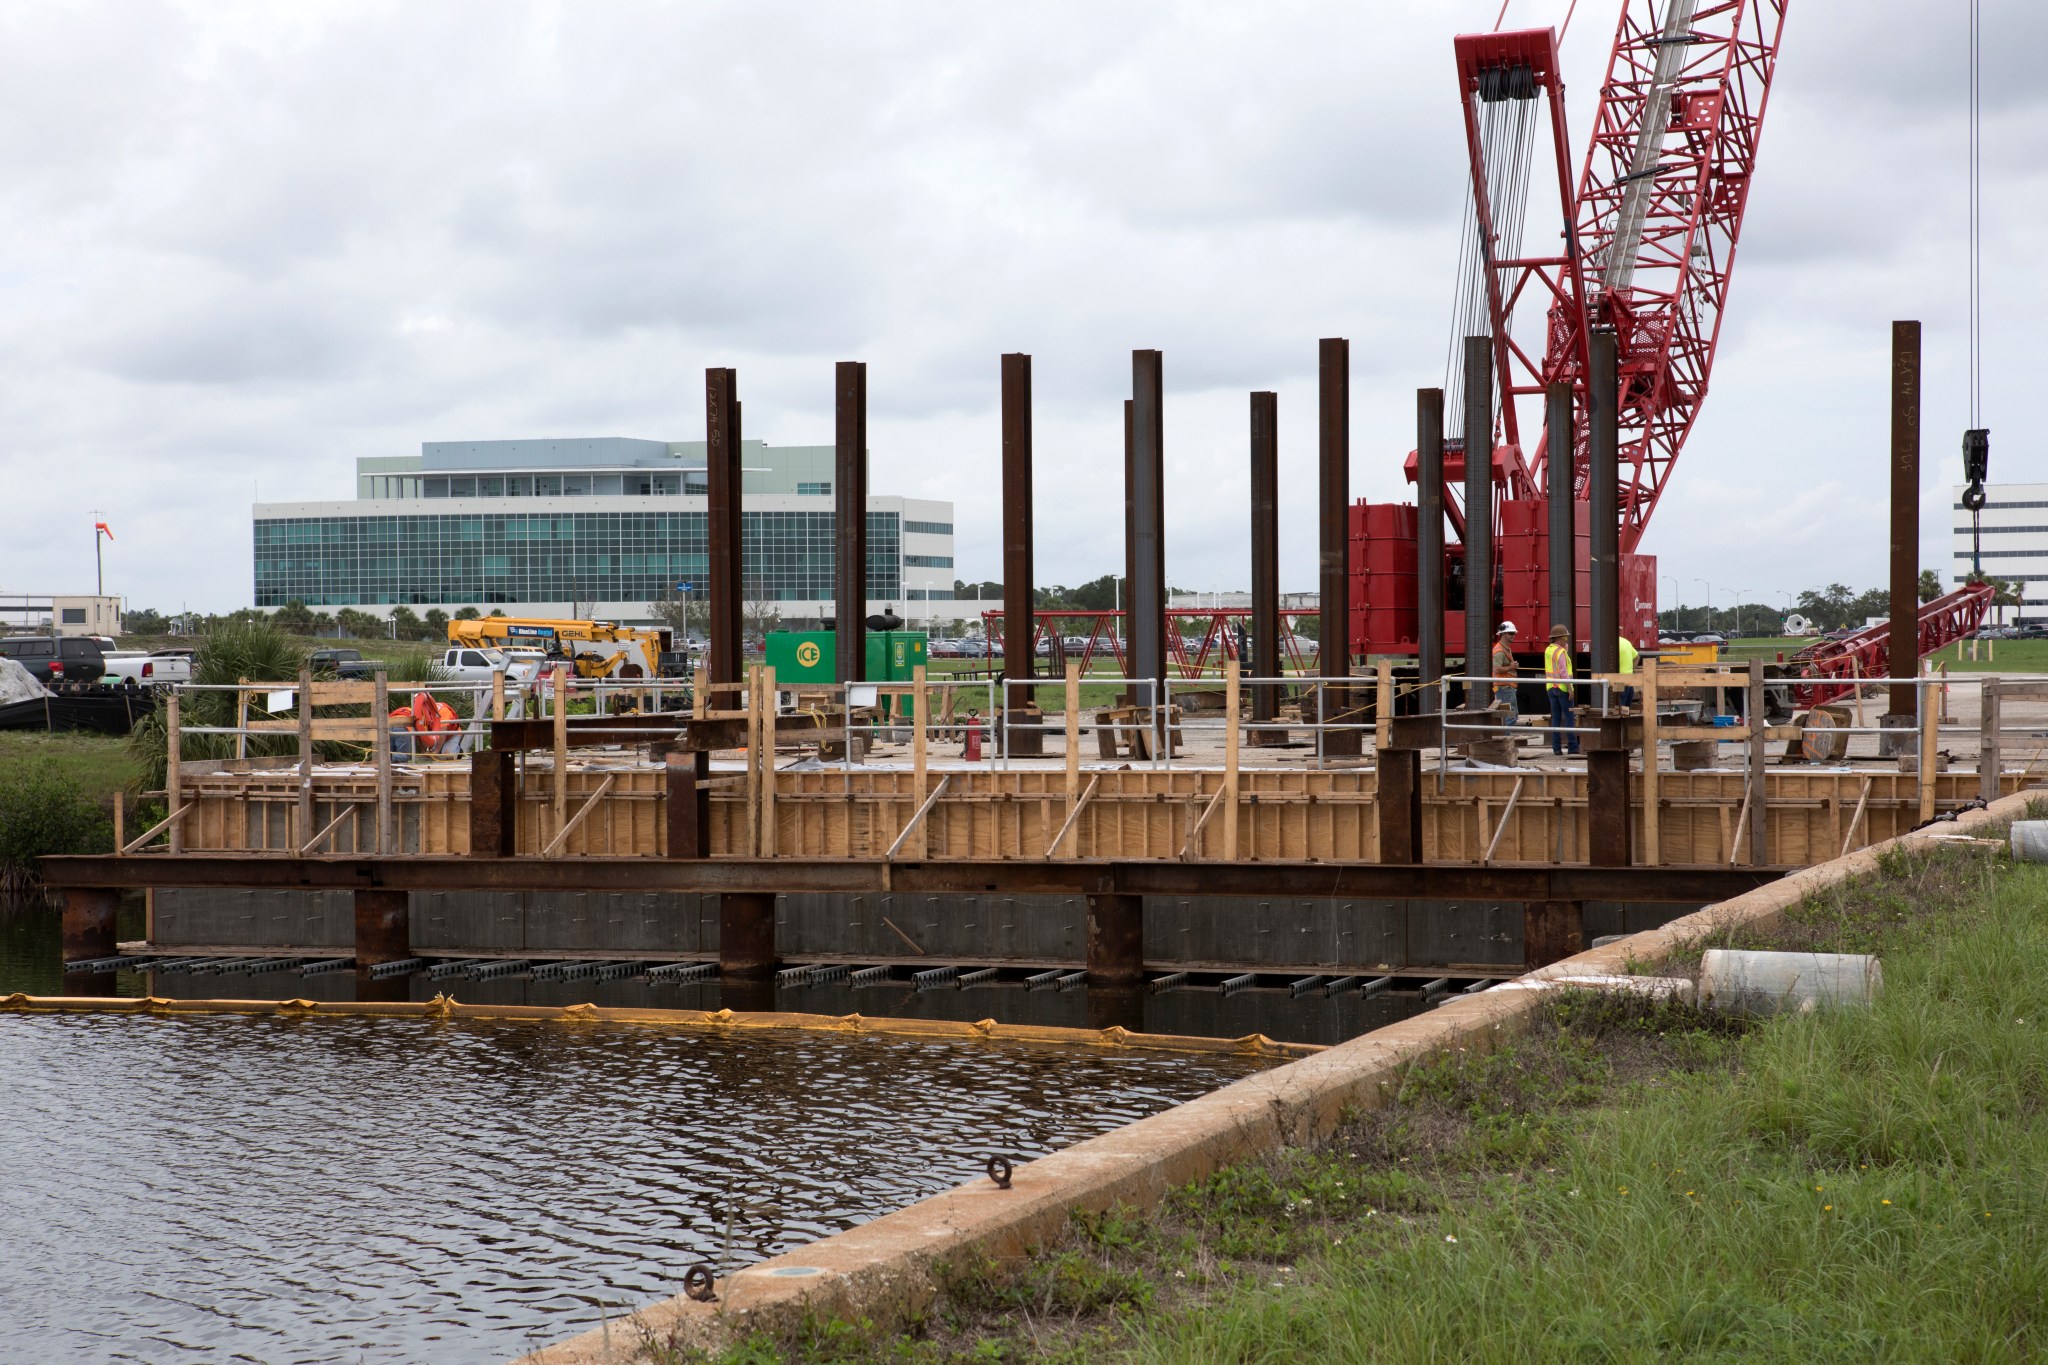 Modifications are underway at the Launch Complex 39 turn basin wharf at Kennedy Space Center in Florida.